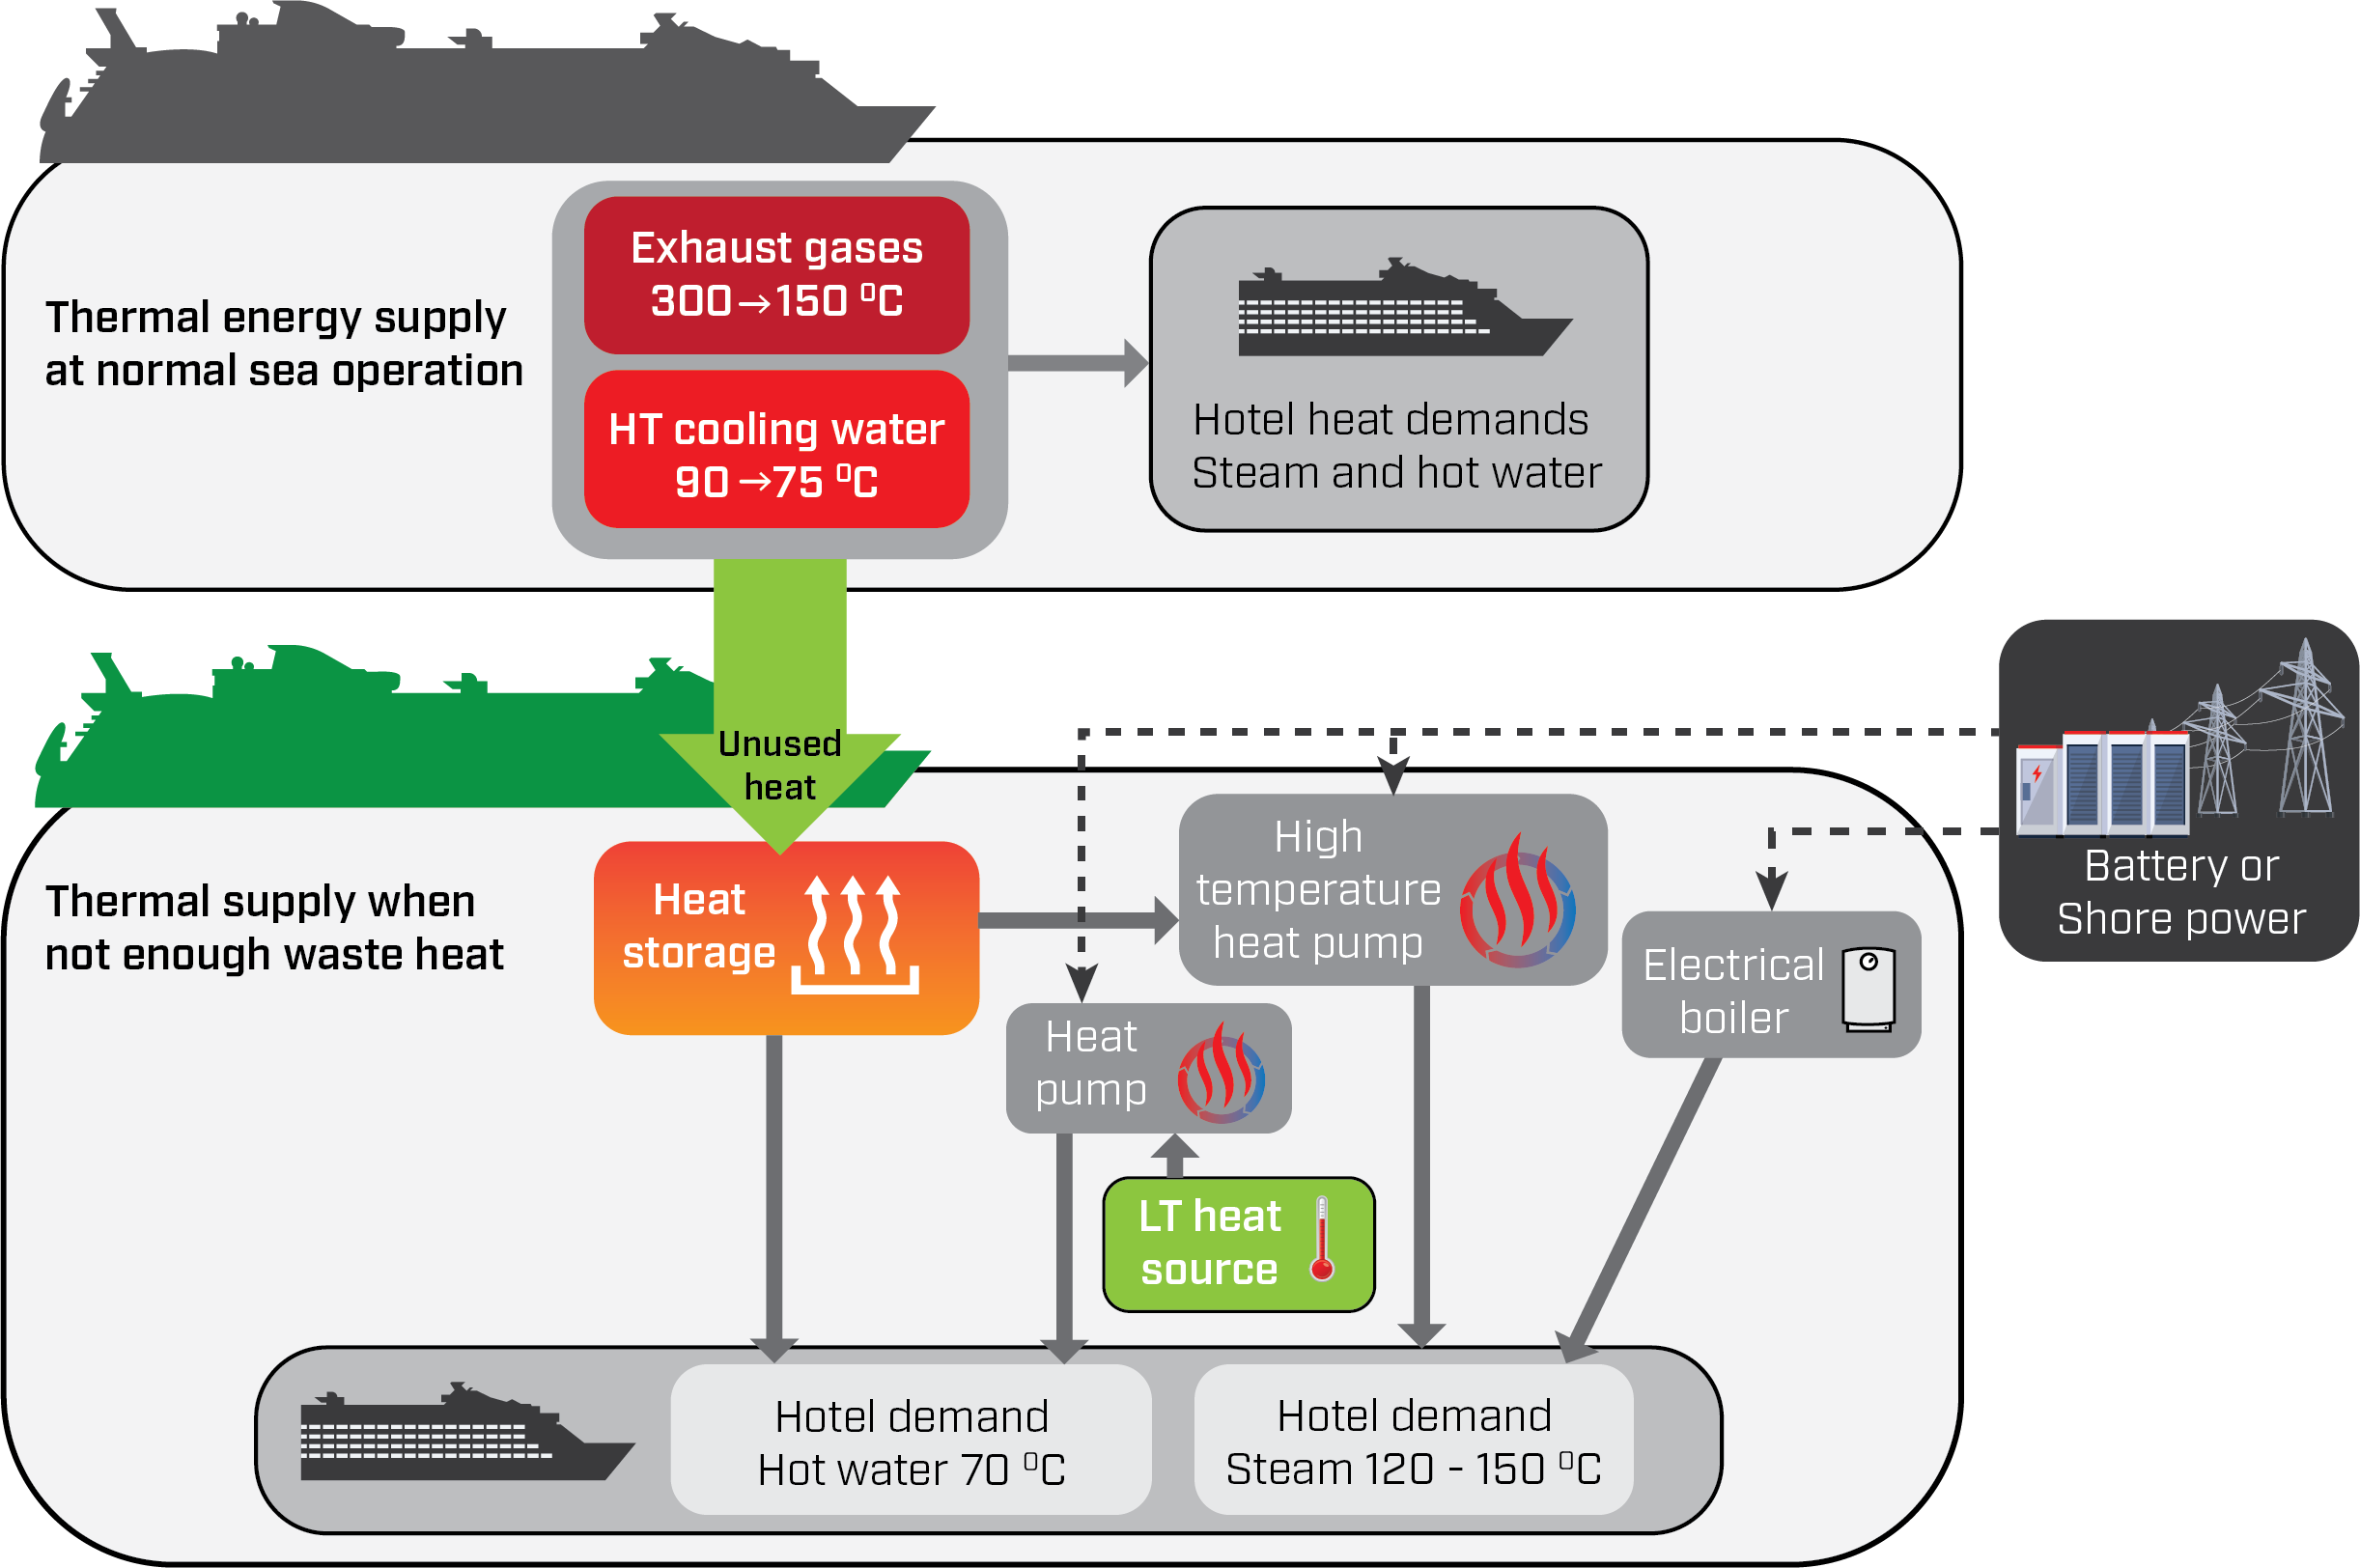 Illustration of an innovative heat supply system for cruise ships.